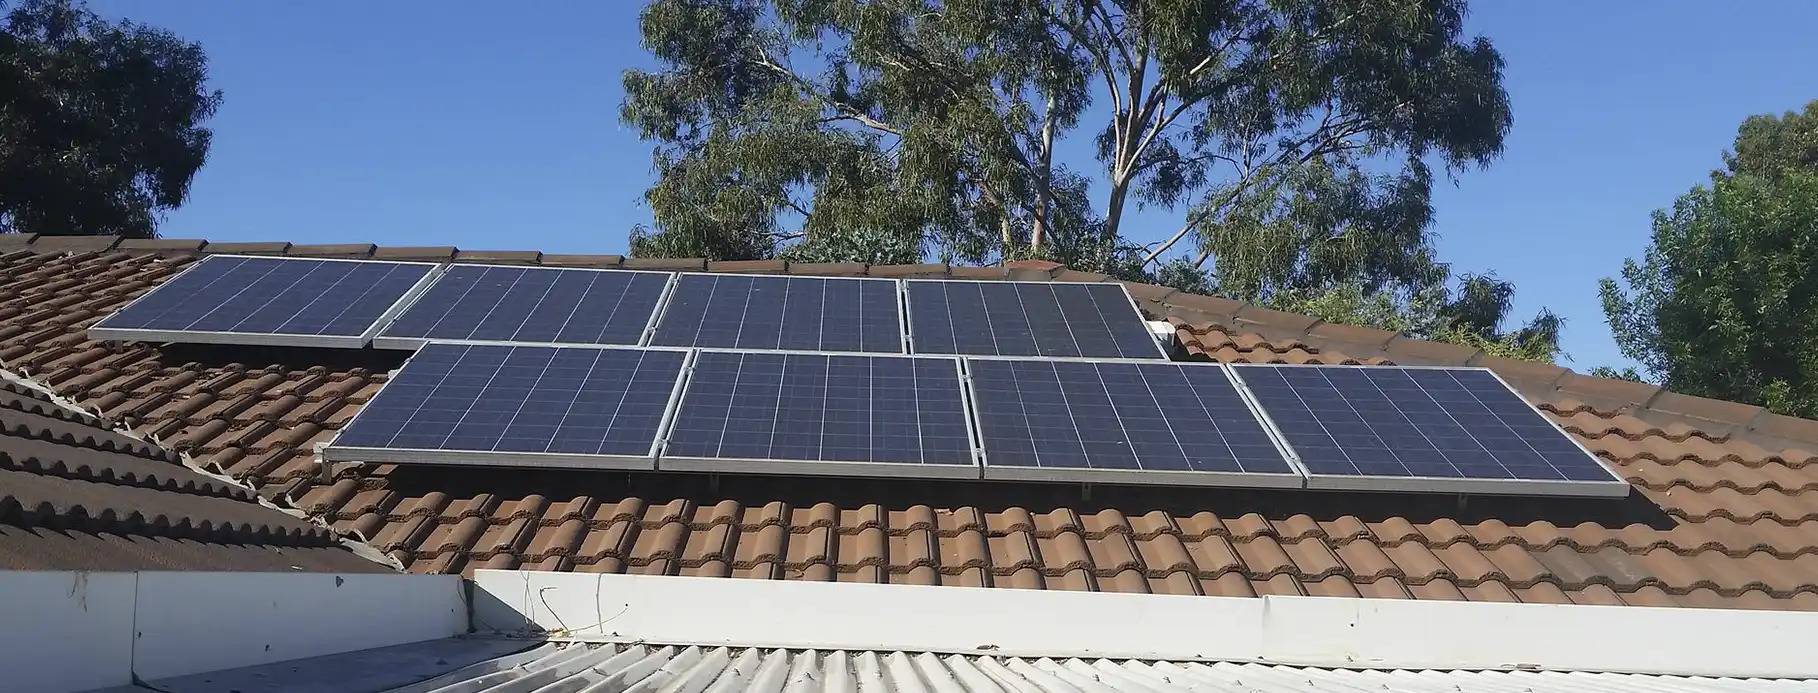 The Benefits of Installing a 5kW Solar System for Your Home